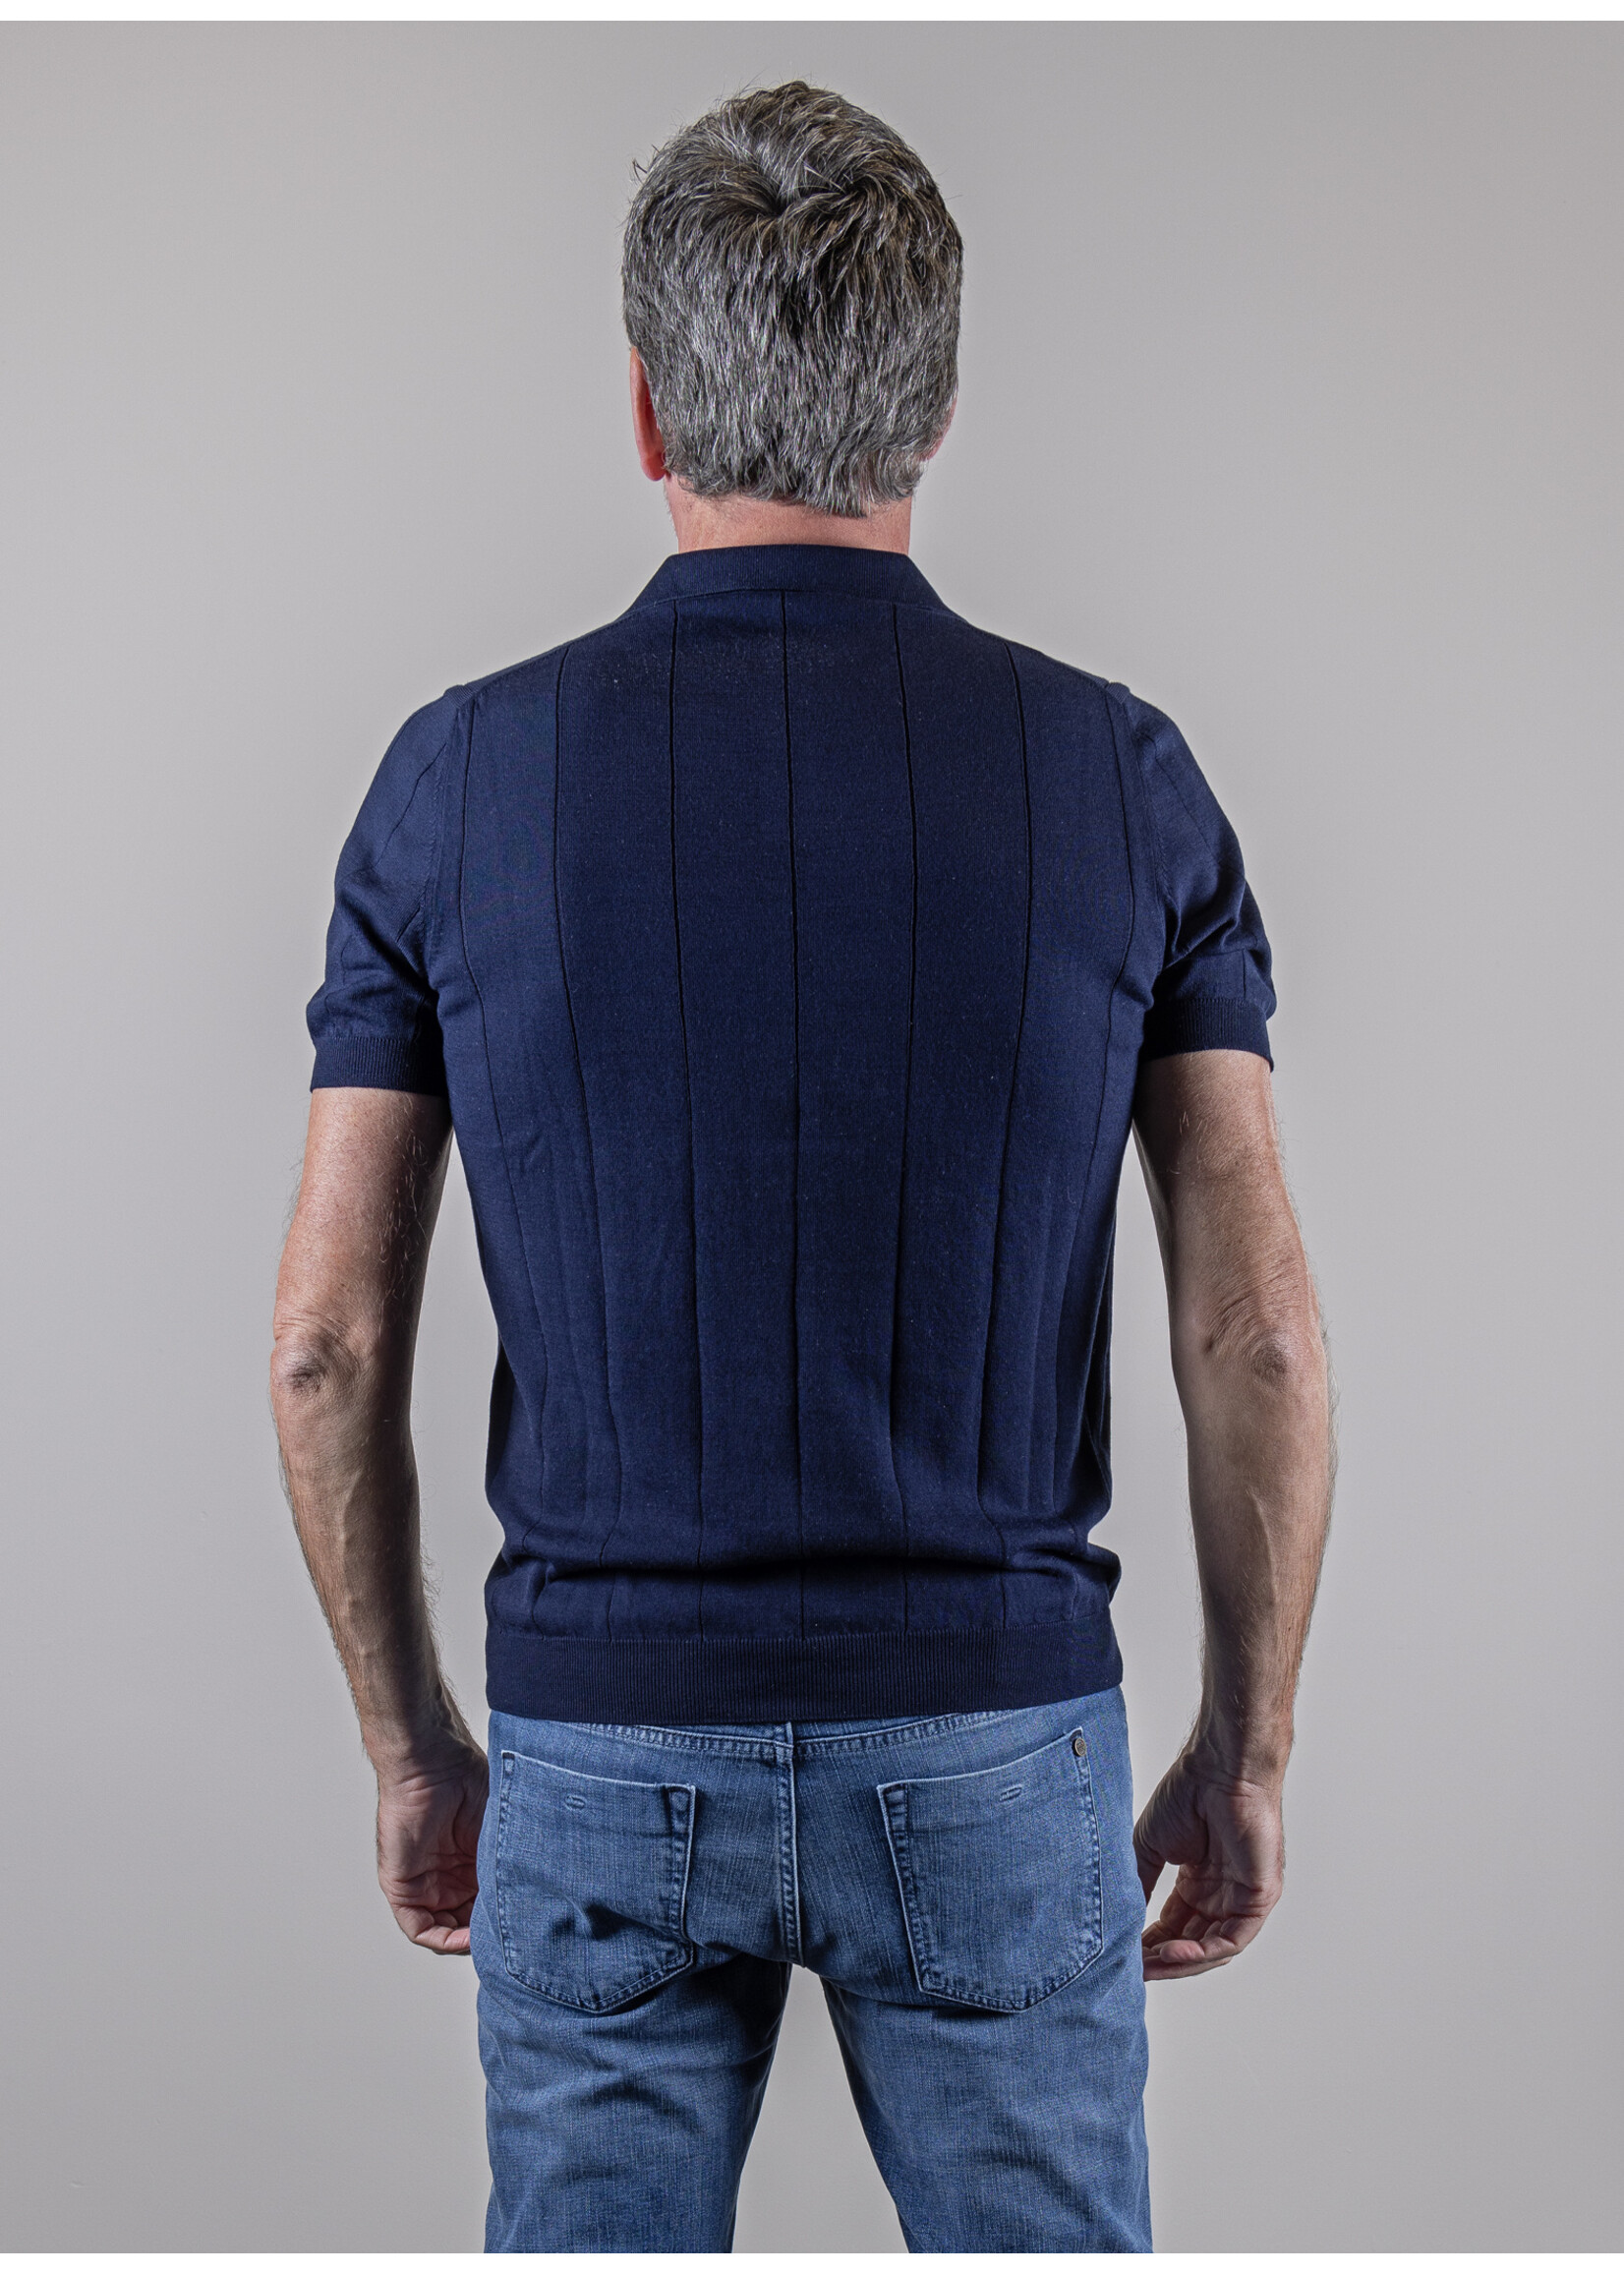 Ridiculous Classic Knitpolo Short Sleeve Navy